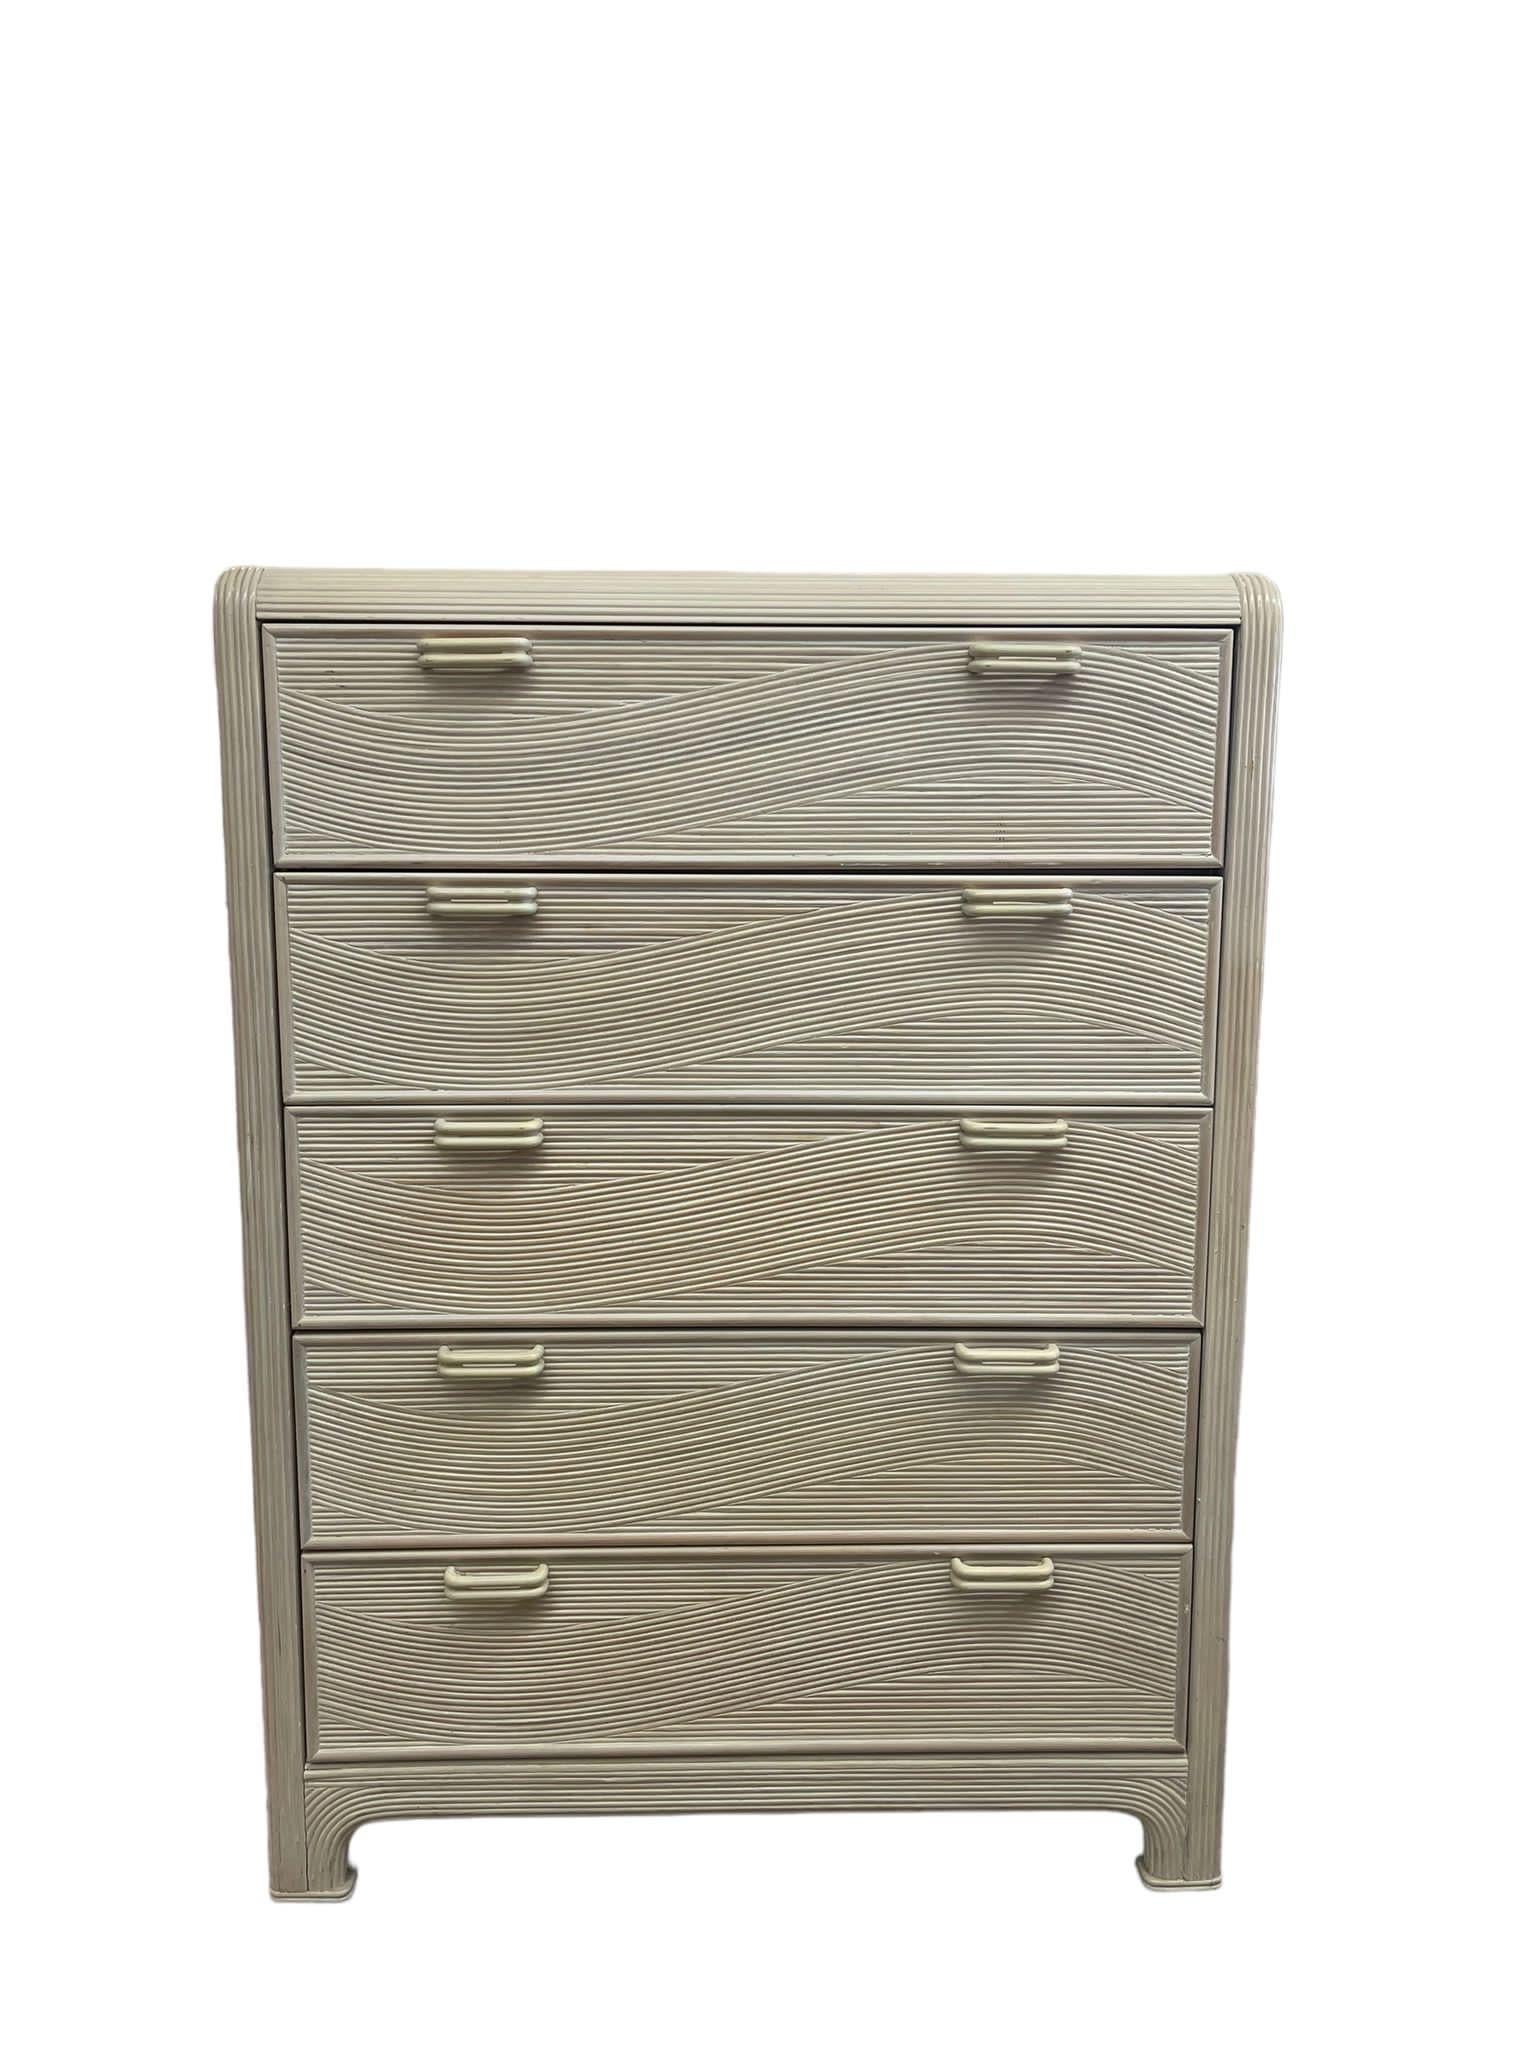 Whitewashed Finish and Wooden Handles Accompanied by the Wave Design make this Dresser Unique. Other Items in this Collection are also Available on our Website. Vintage Condition Consistent with Age as Pictured

Dimensions. 35 1/2 W ; 19 D ; 49 H